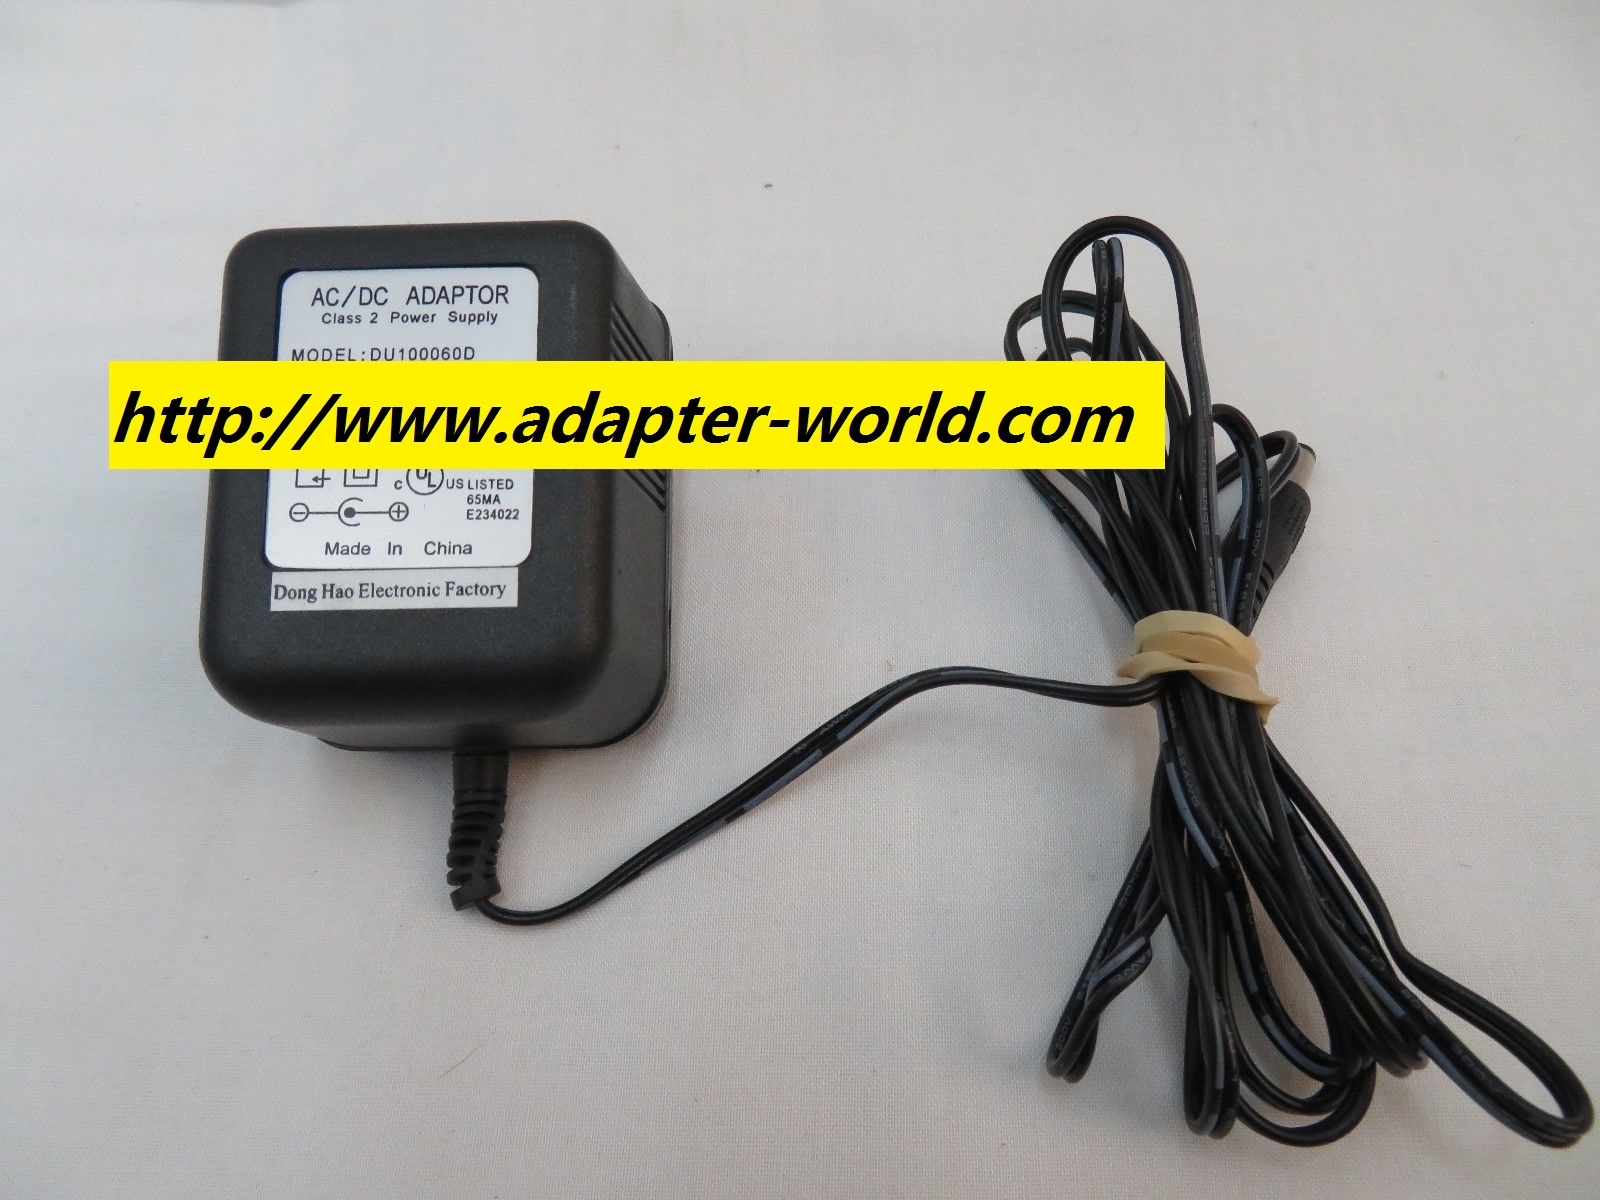 *100% Brand NEW* Cable Source Output 12V 1.5A IVP045-120-1500 AC DC Power Supply Adapter Charger - Click Image to Close